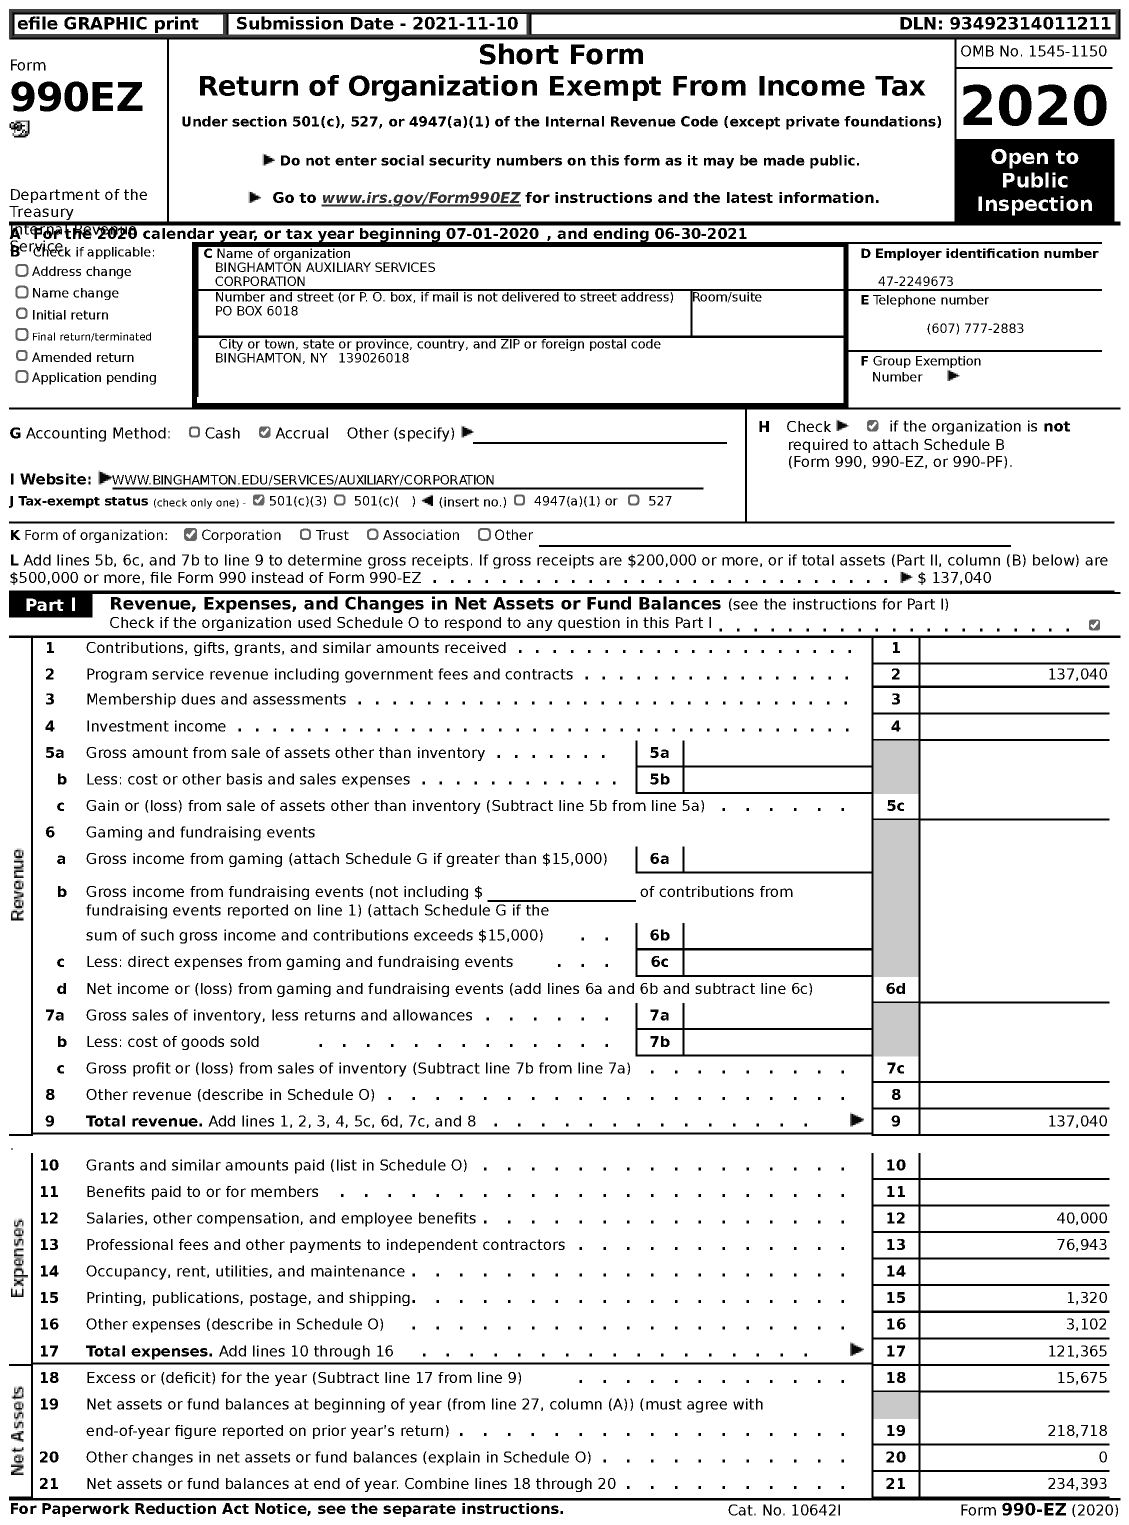 Image of first page of 2020 Form 990EZ for Binghamton Auxiliary Services Corporation